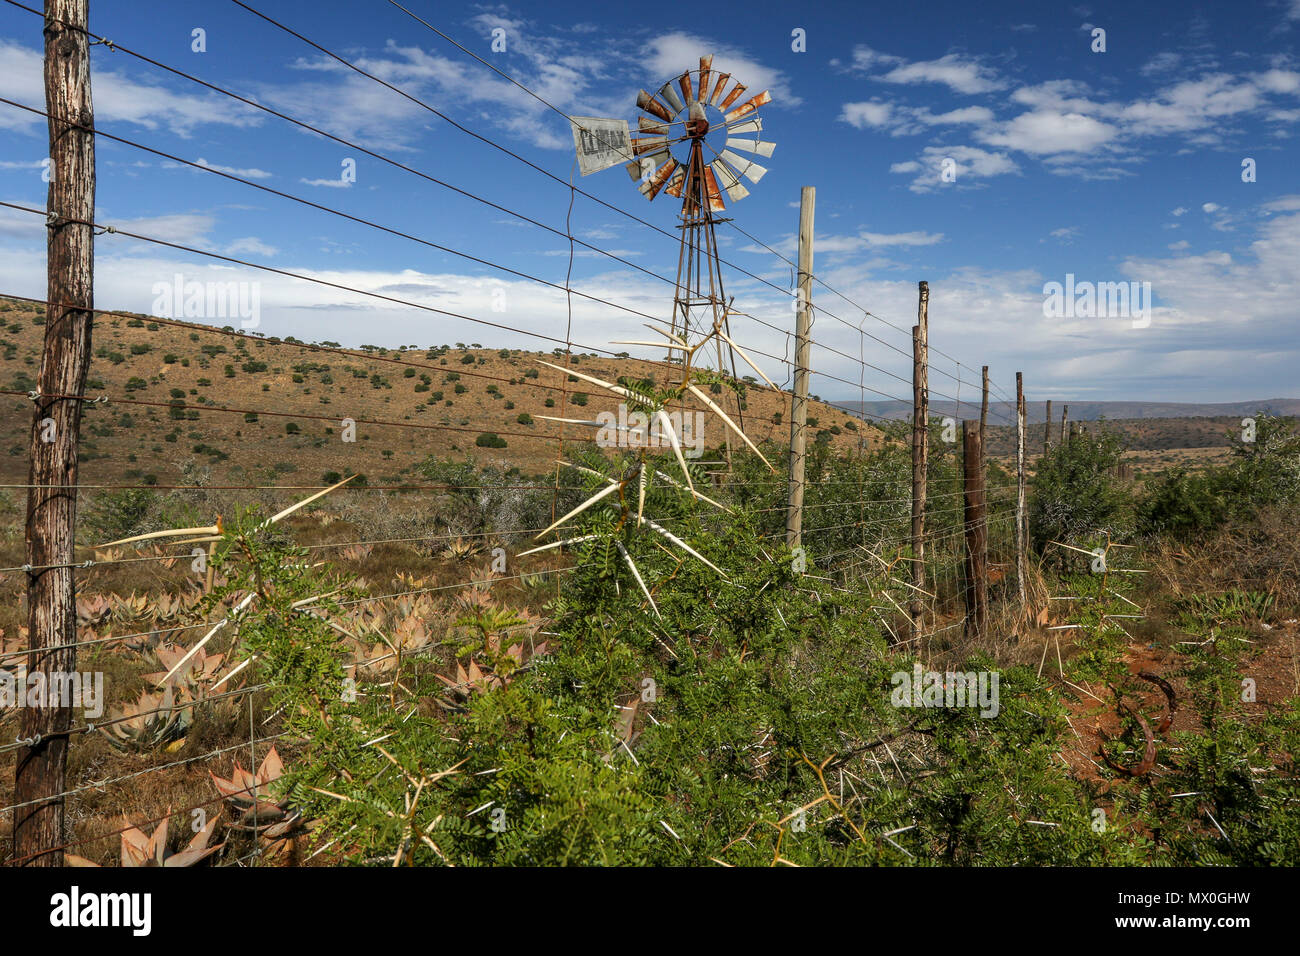 Multi-bladed windpump acacia and eastern cape fynbos in the landscape. The Addo Elephant National Park, eastern cape, south Africa Stock Photo